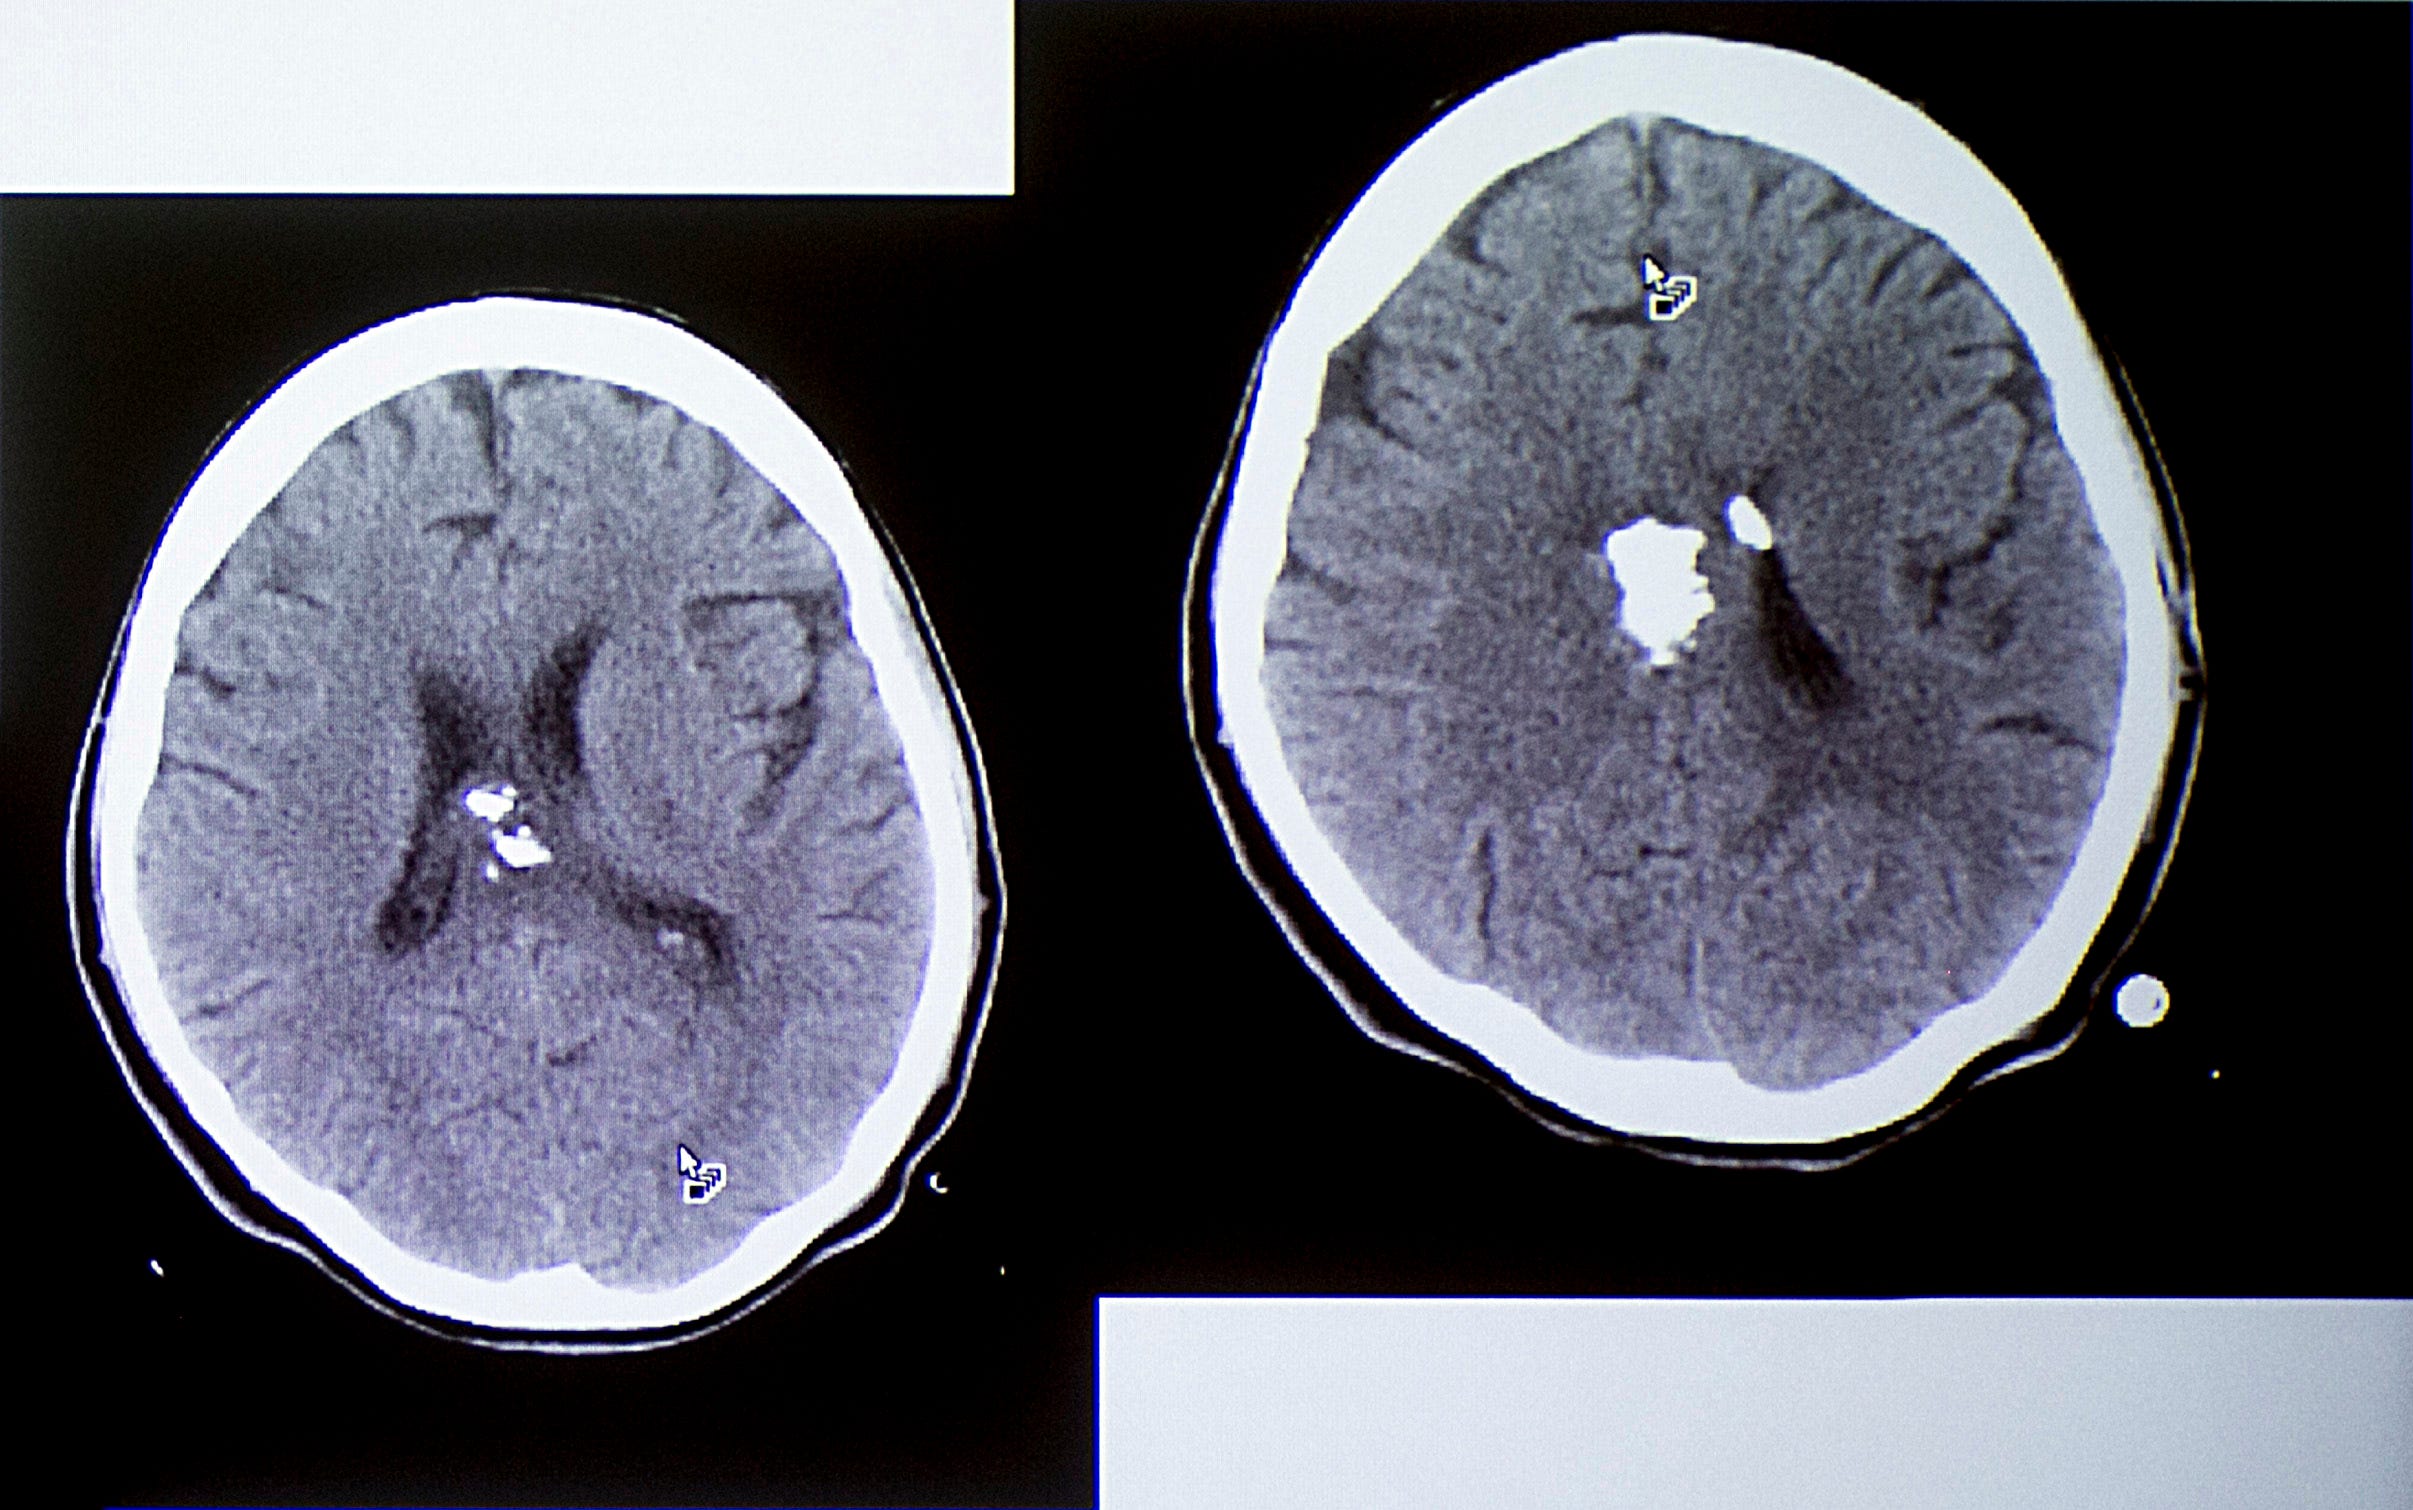 Bullet fragments, which appear white, show up on a brain image of Jovanna Calzadillas.